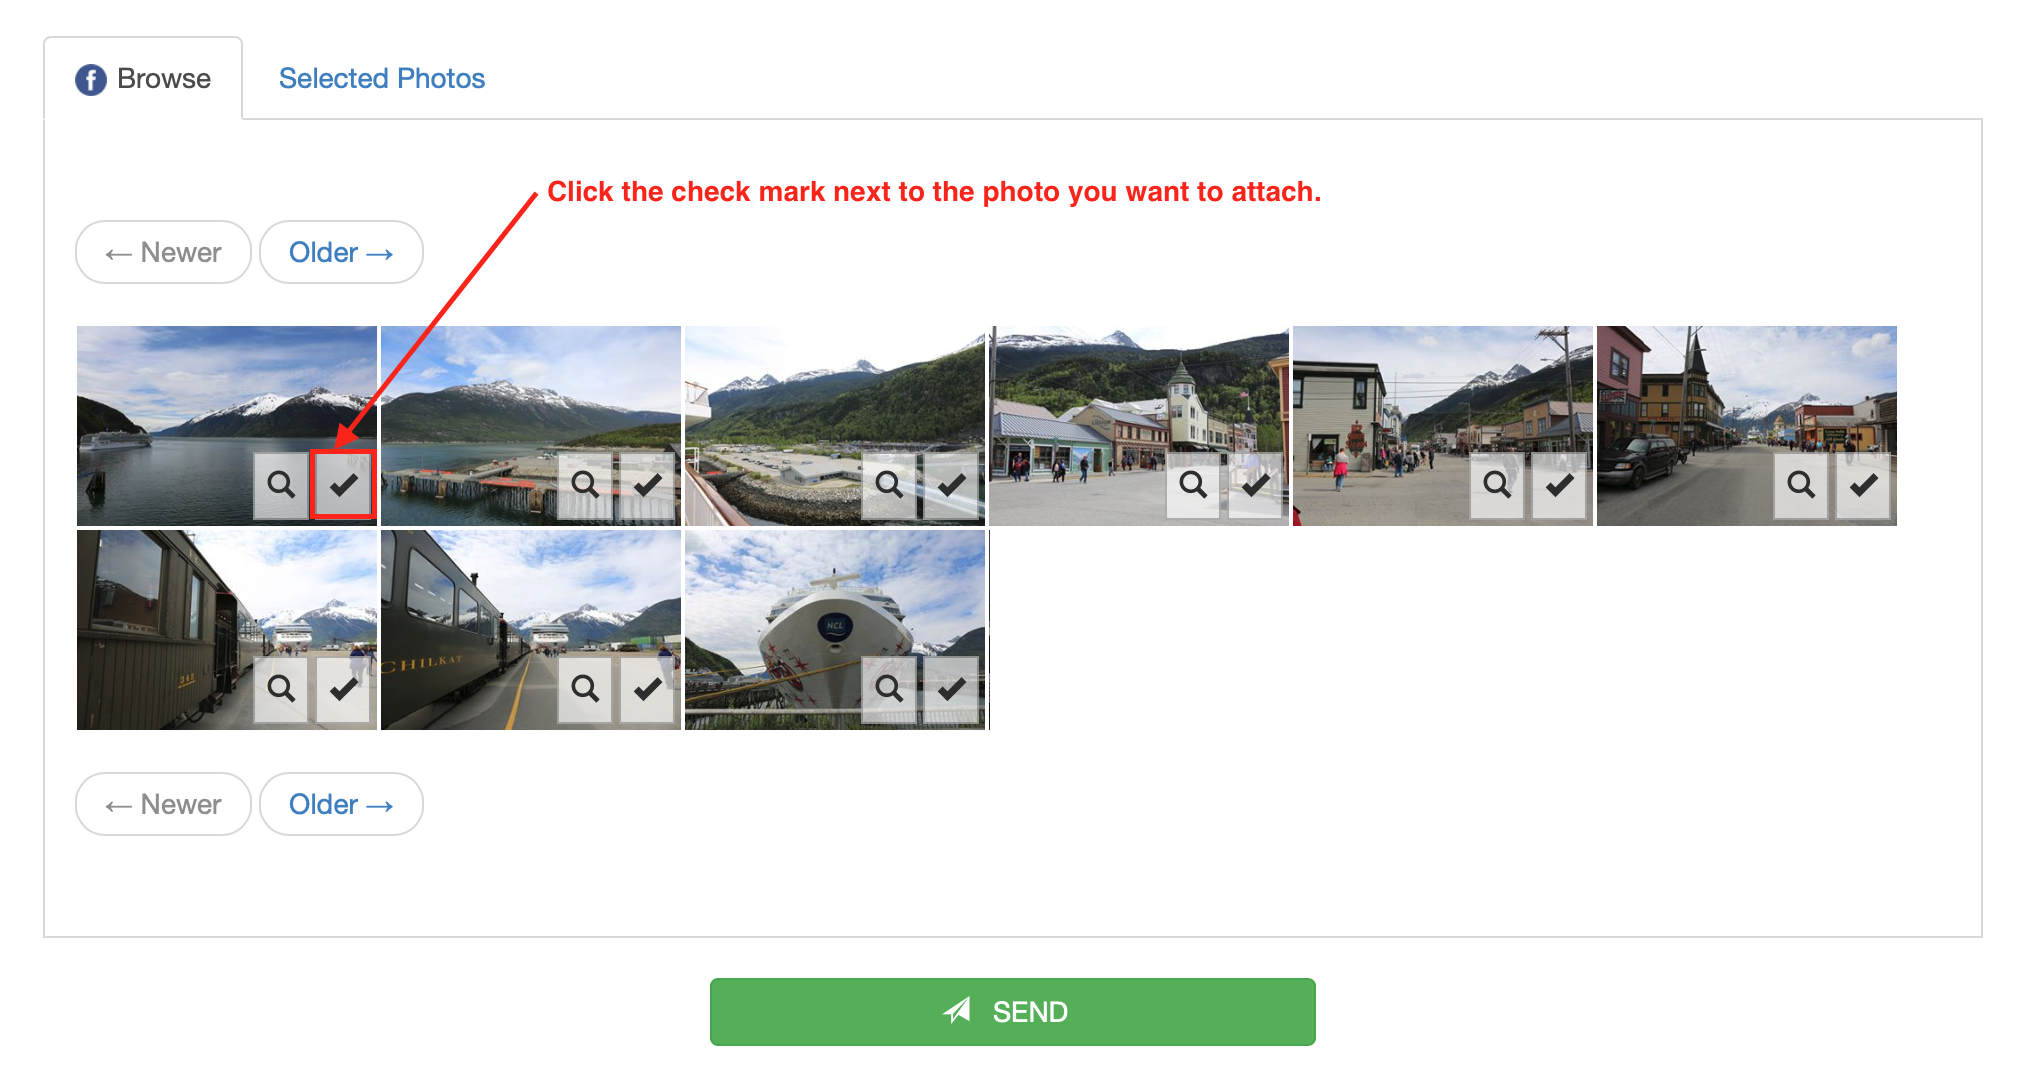 Select the photo(s) you would like to attach by clicking the checkmark under the photo(s). 